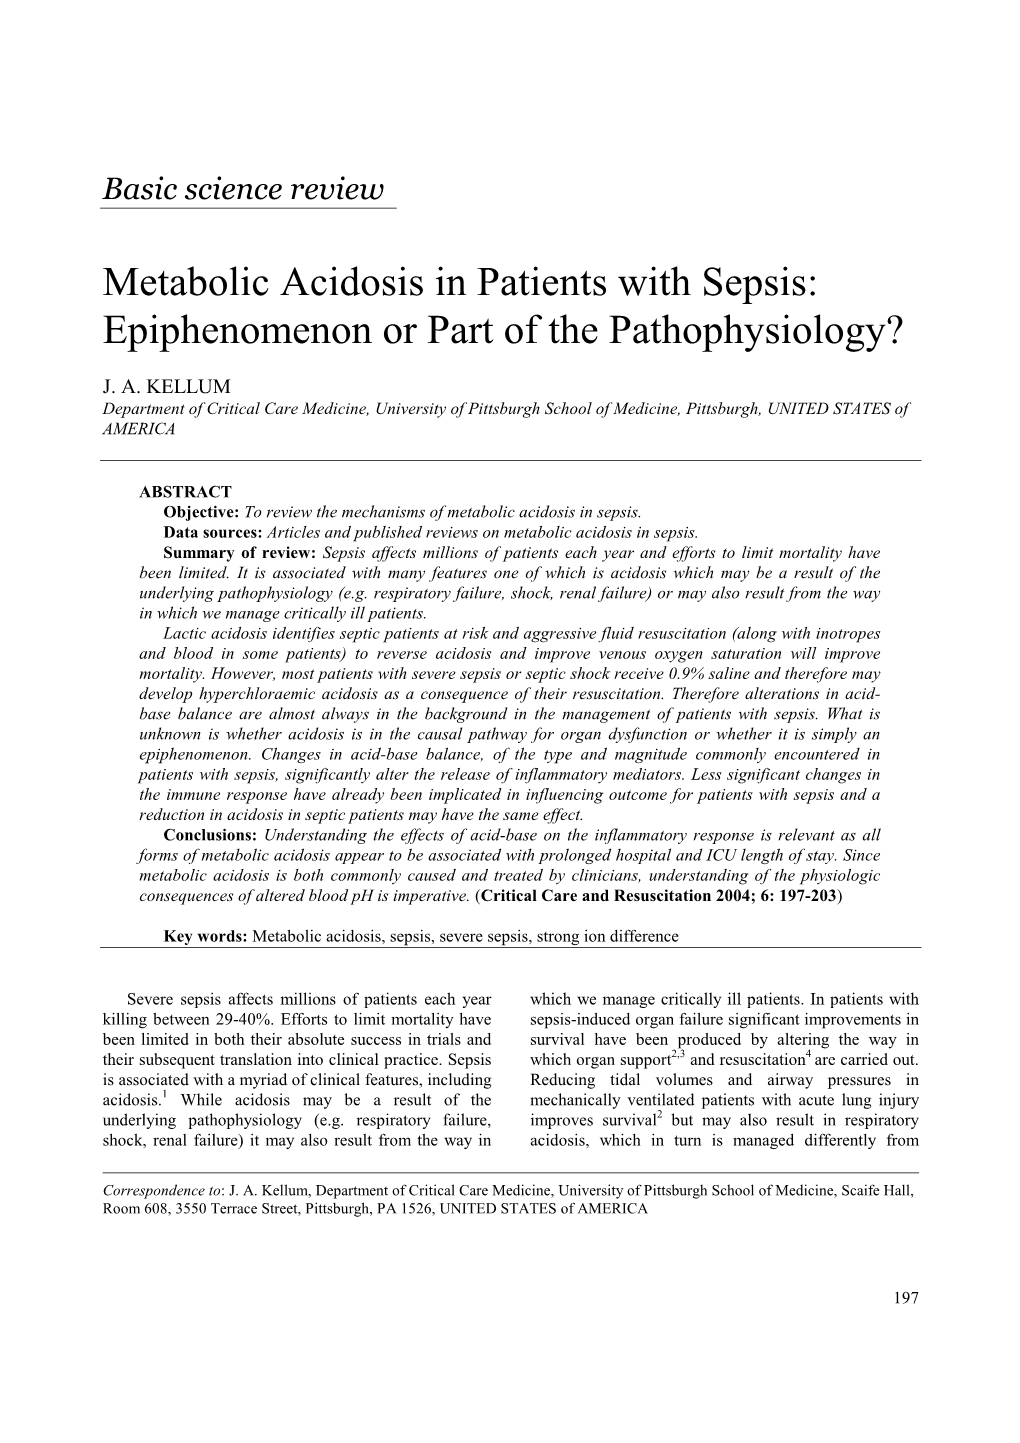 Metabolic Acidosis in Patients with Sepsis: Epiphenomenon Or Part of the Pathophysiology?